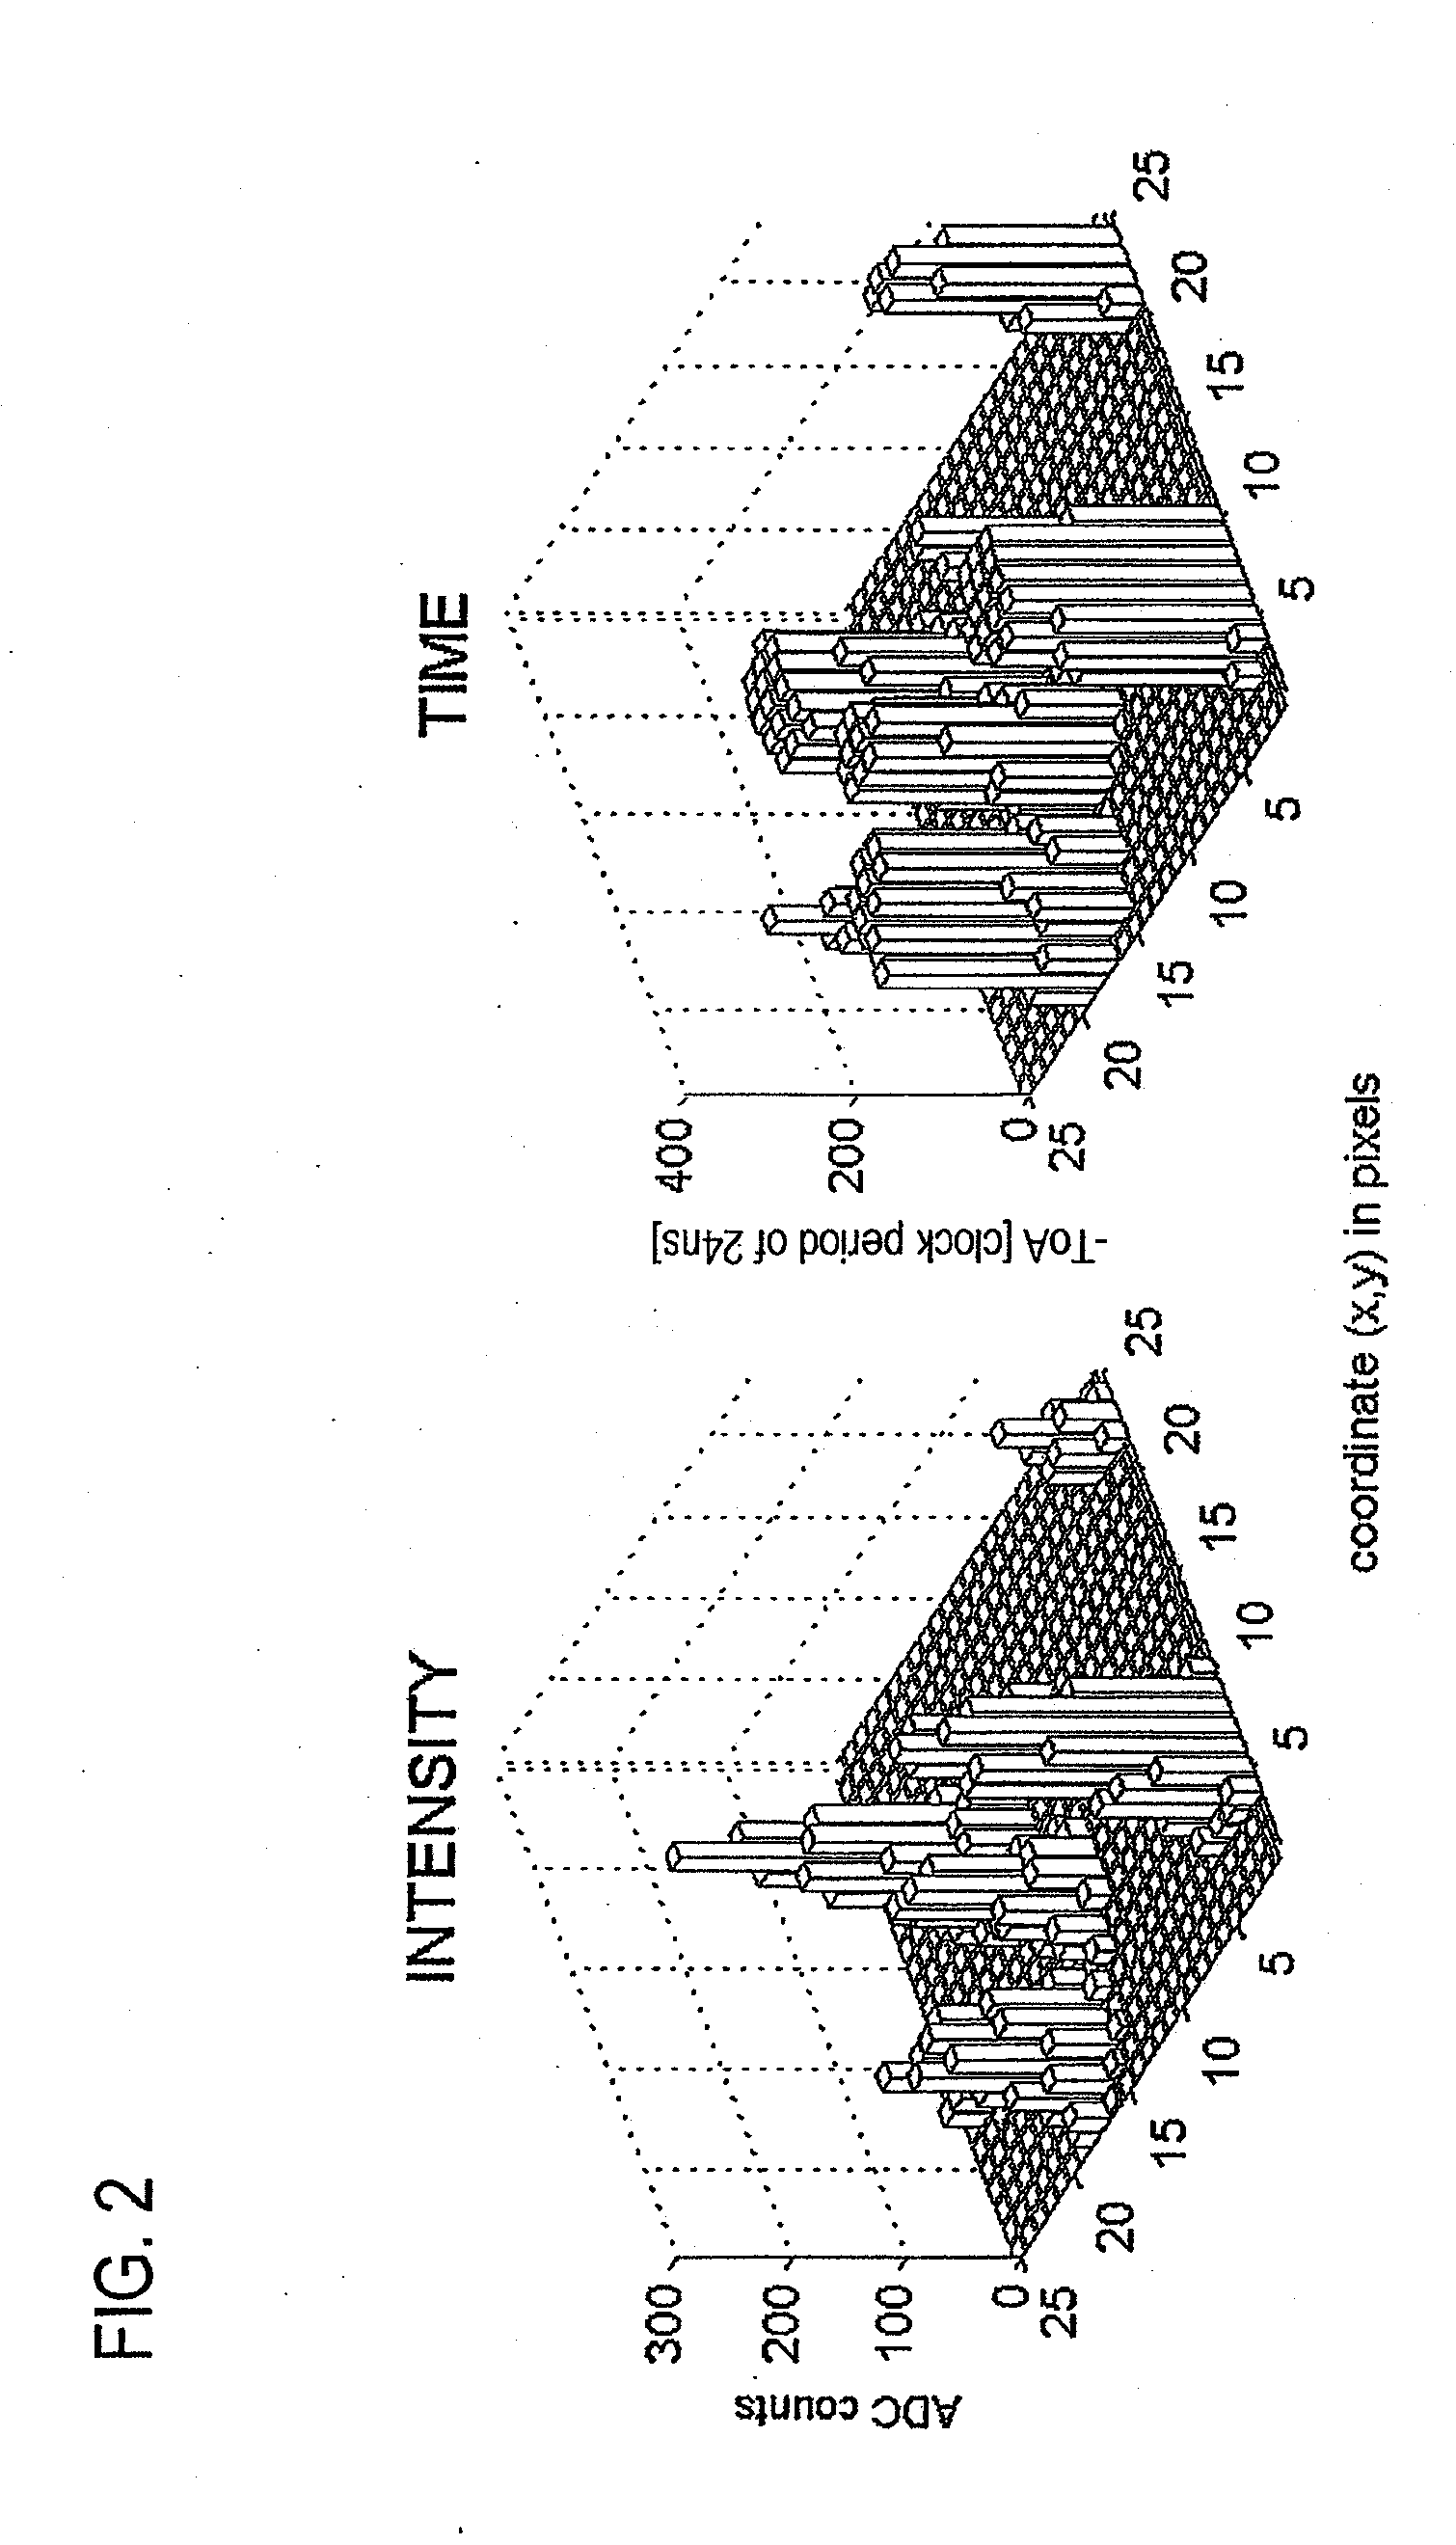 Imaging mass spectrometry principle and its application in a device